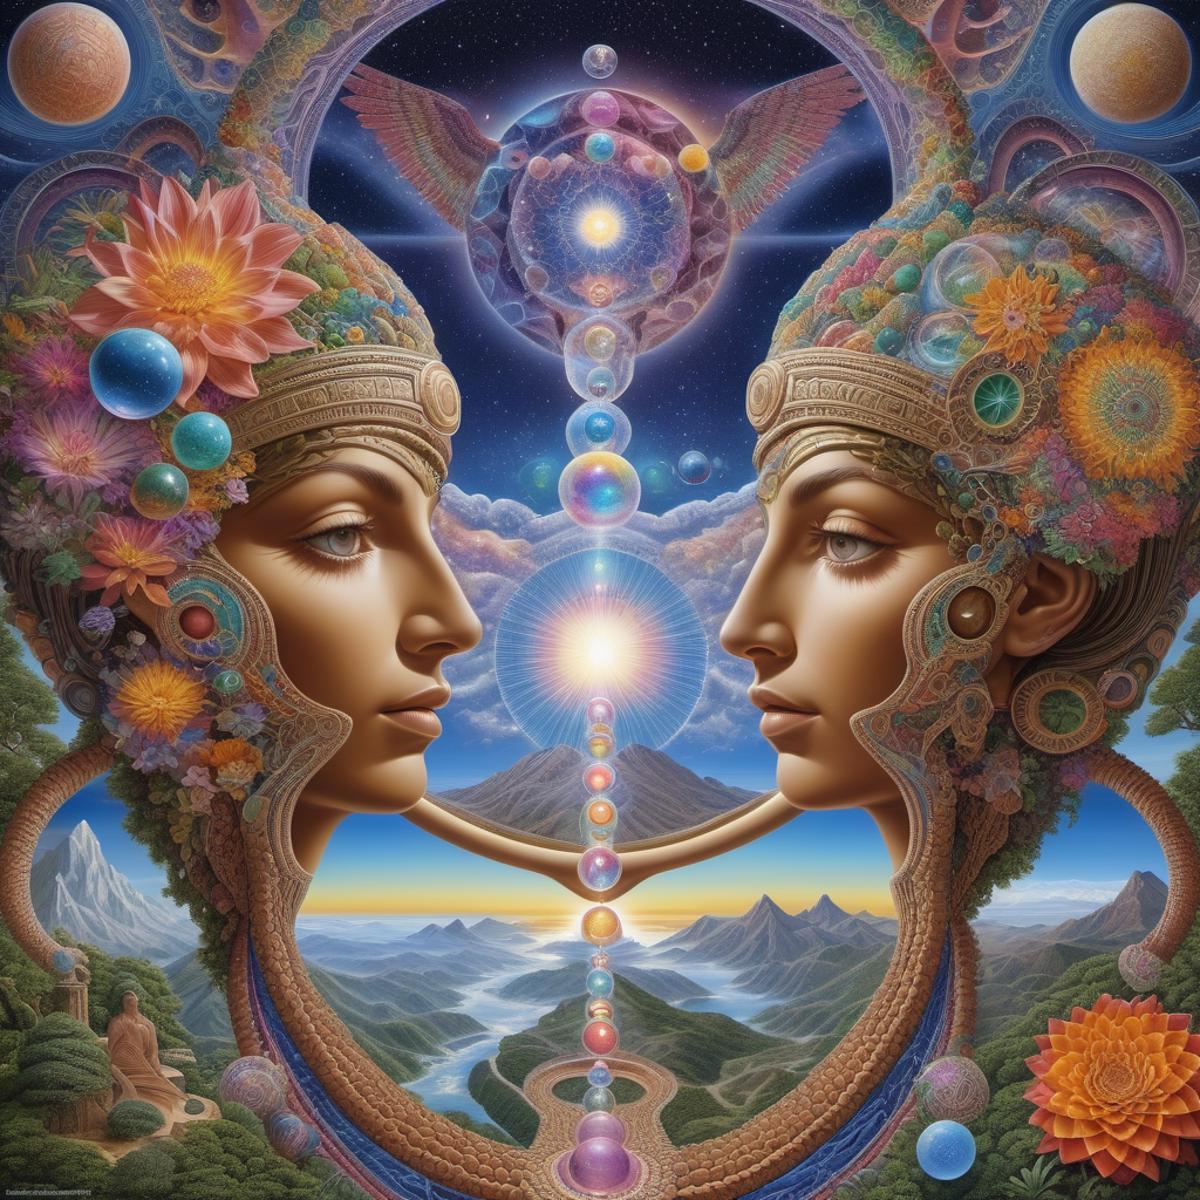 Artistic Poster of Two Women with Headdresses and a Rainbow Bridge